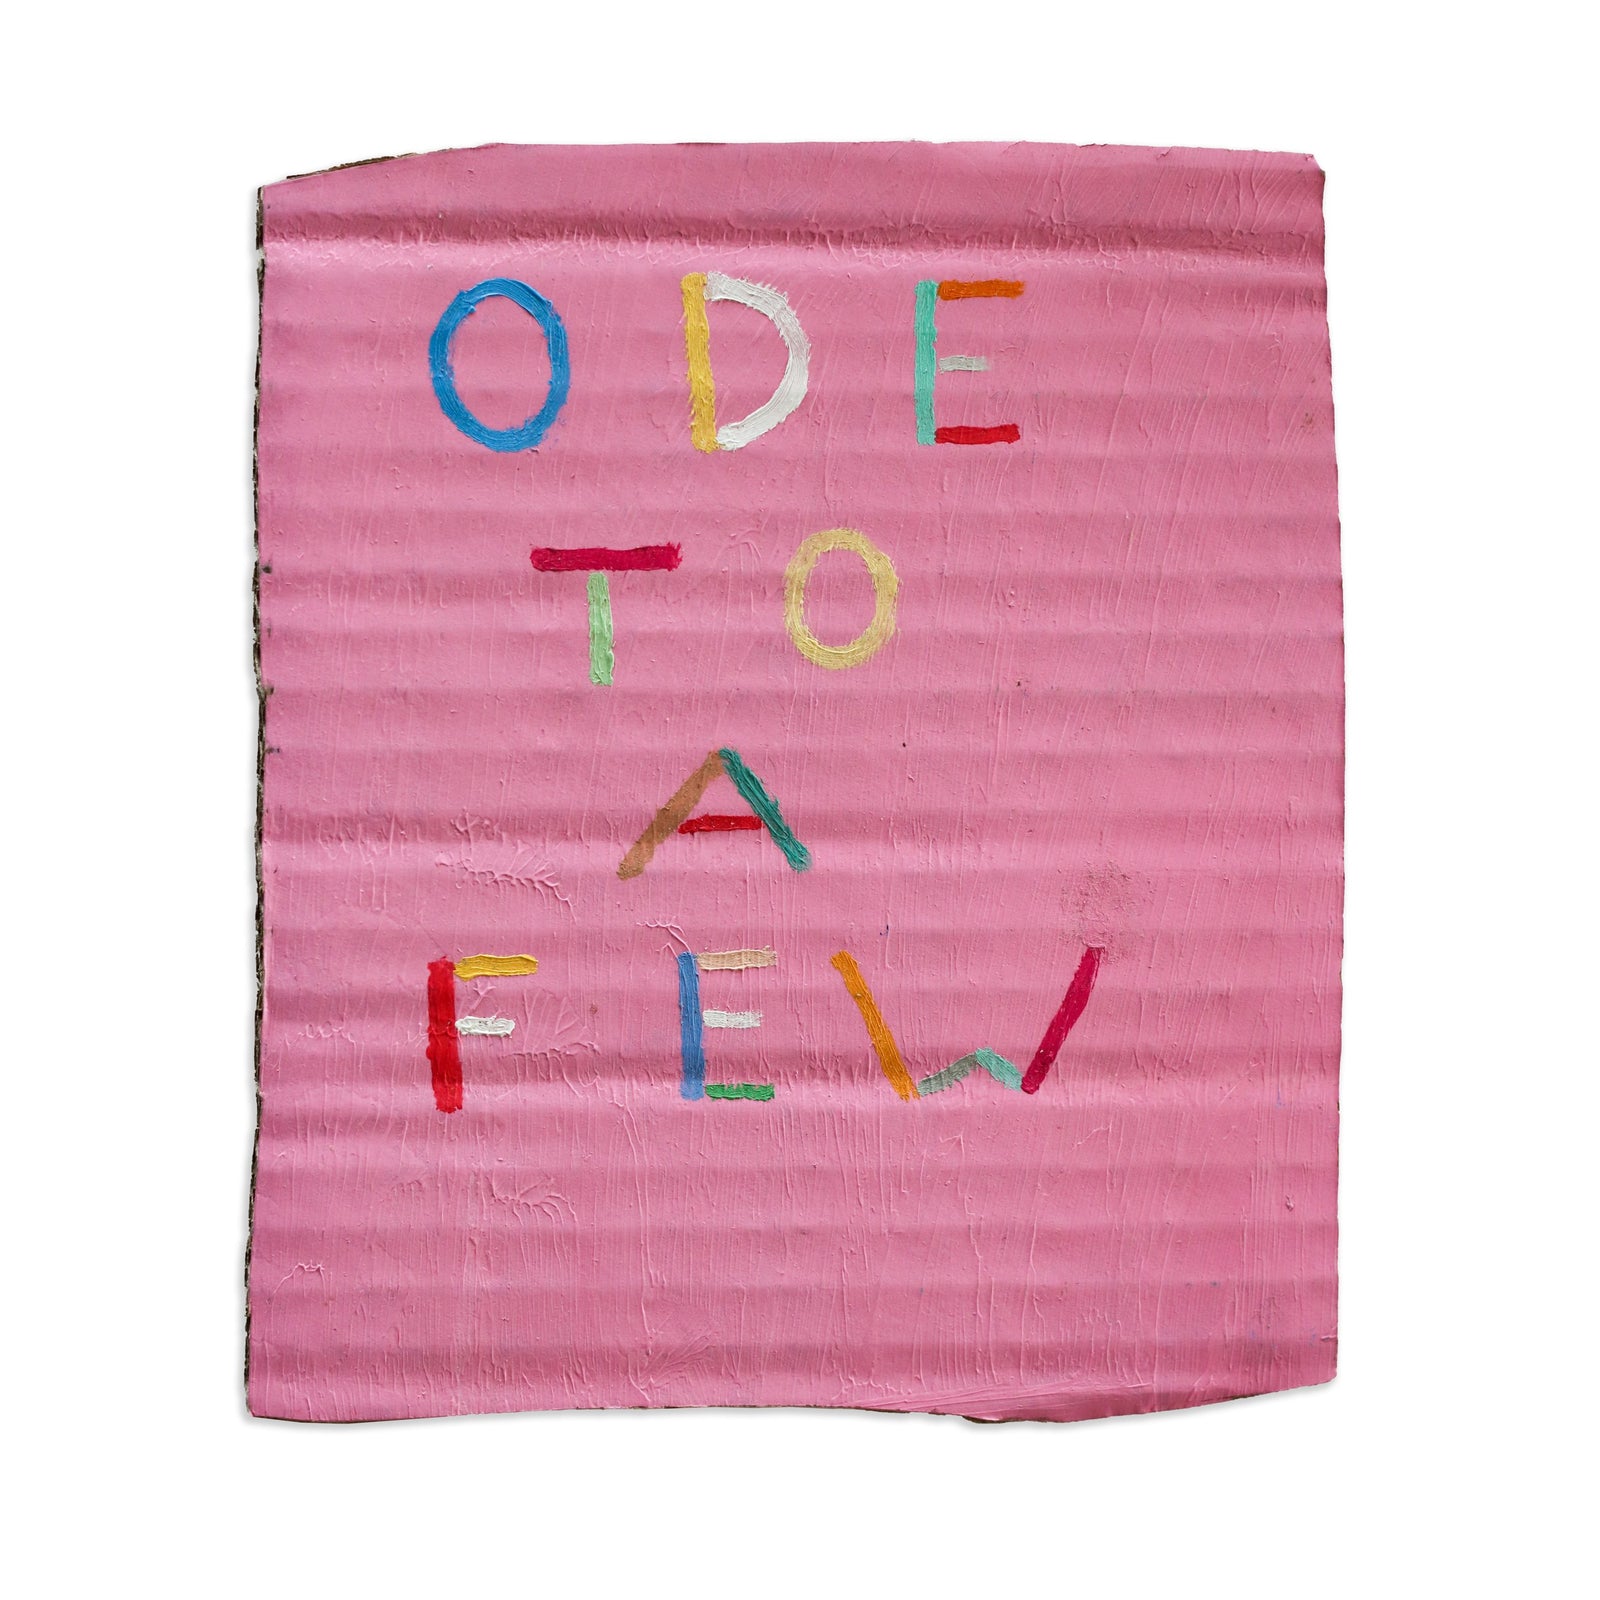 James Hale | ODE TO A FEW (PINK)